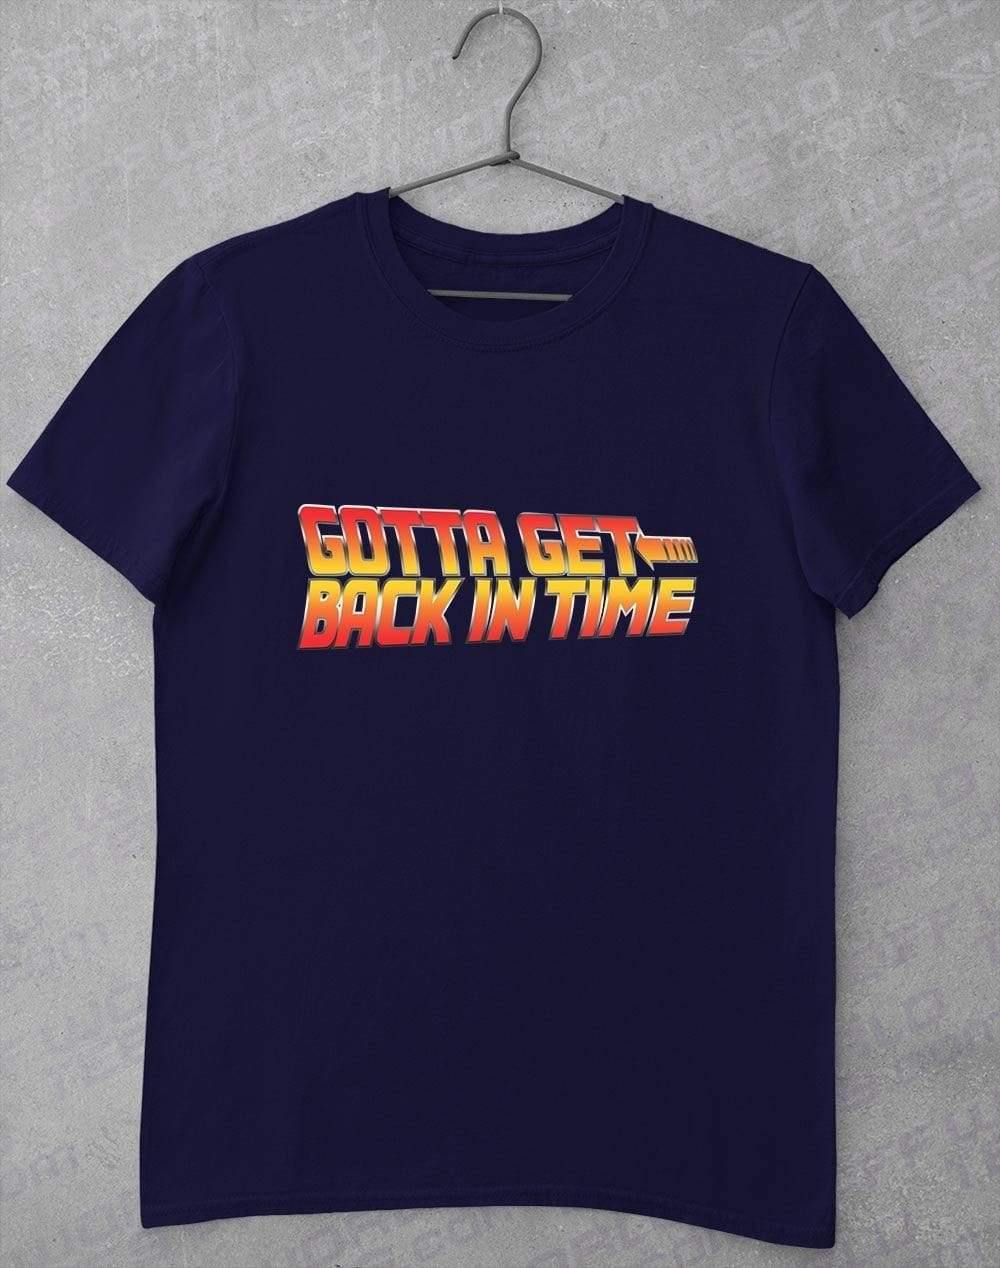 Back in Time T-Shirt S / Navy  - Off World Tees